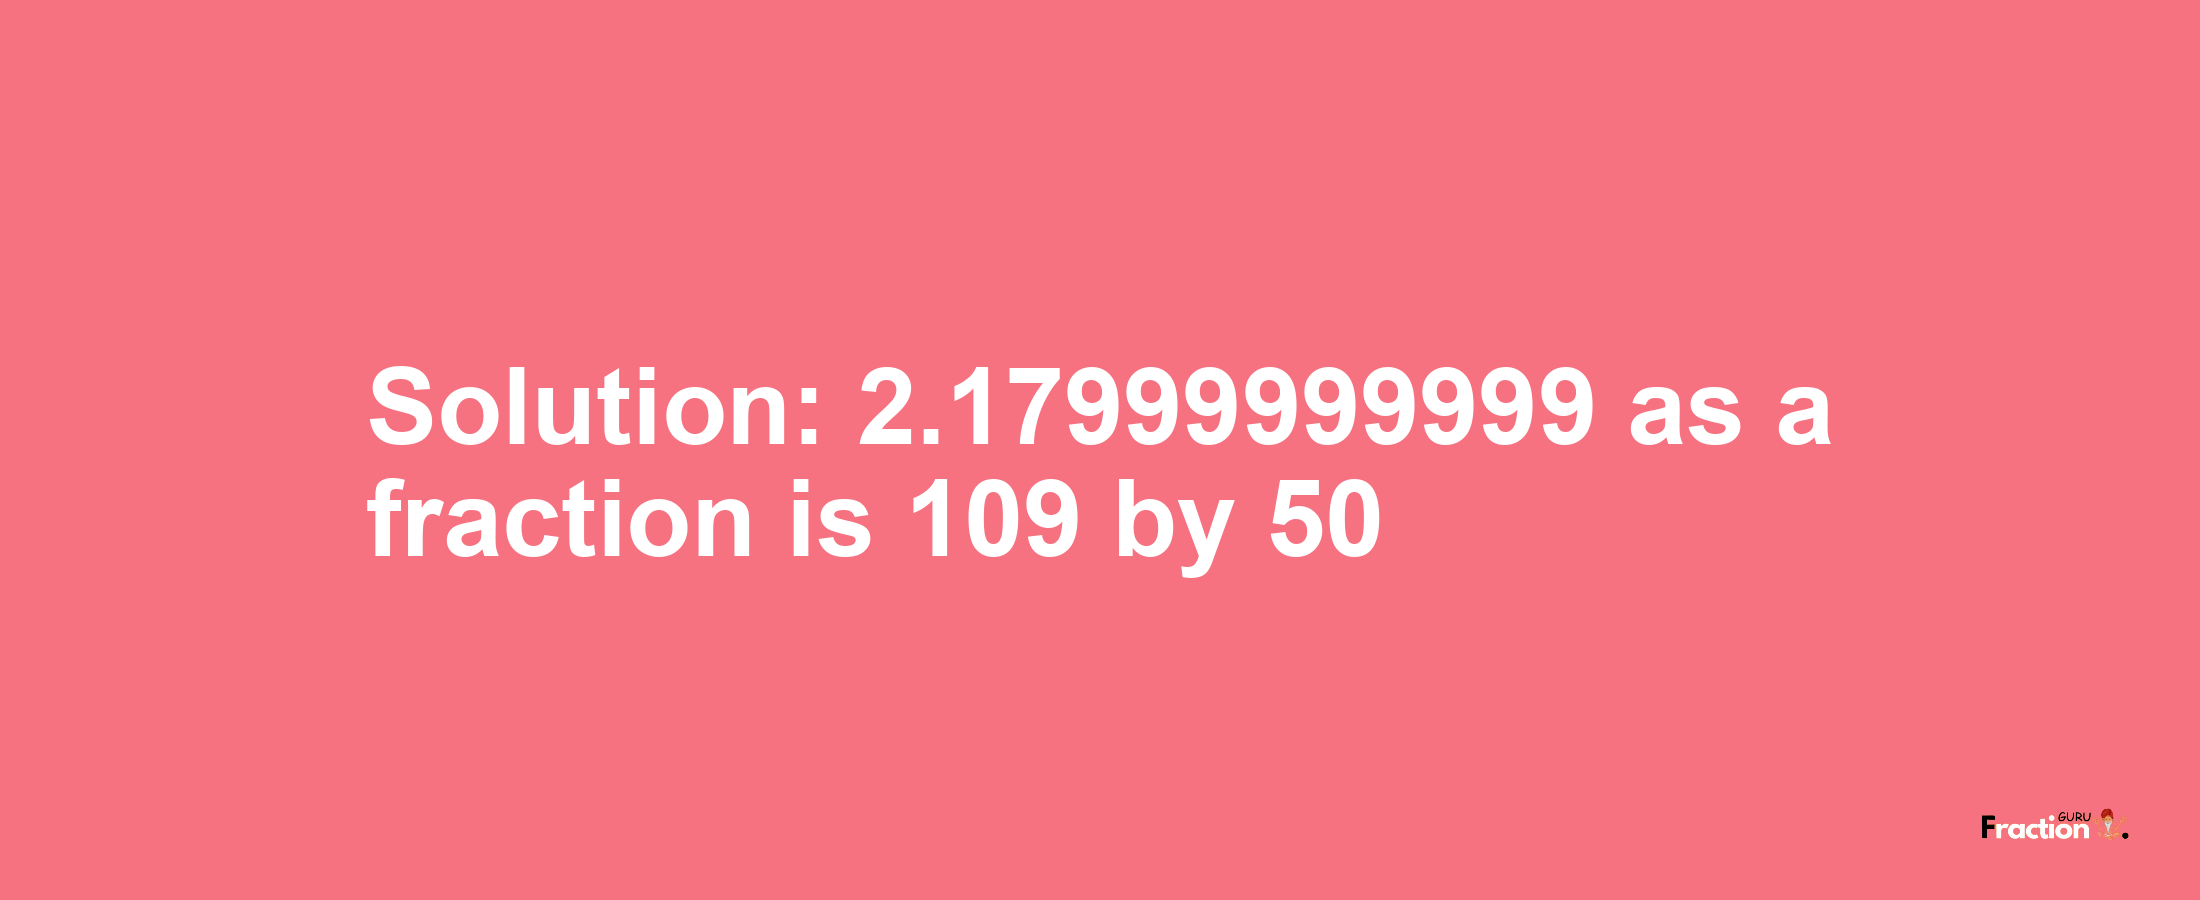 Solution:2.17999999999 as a fraction is 109/50